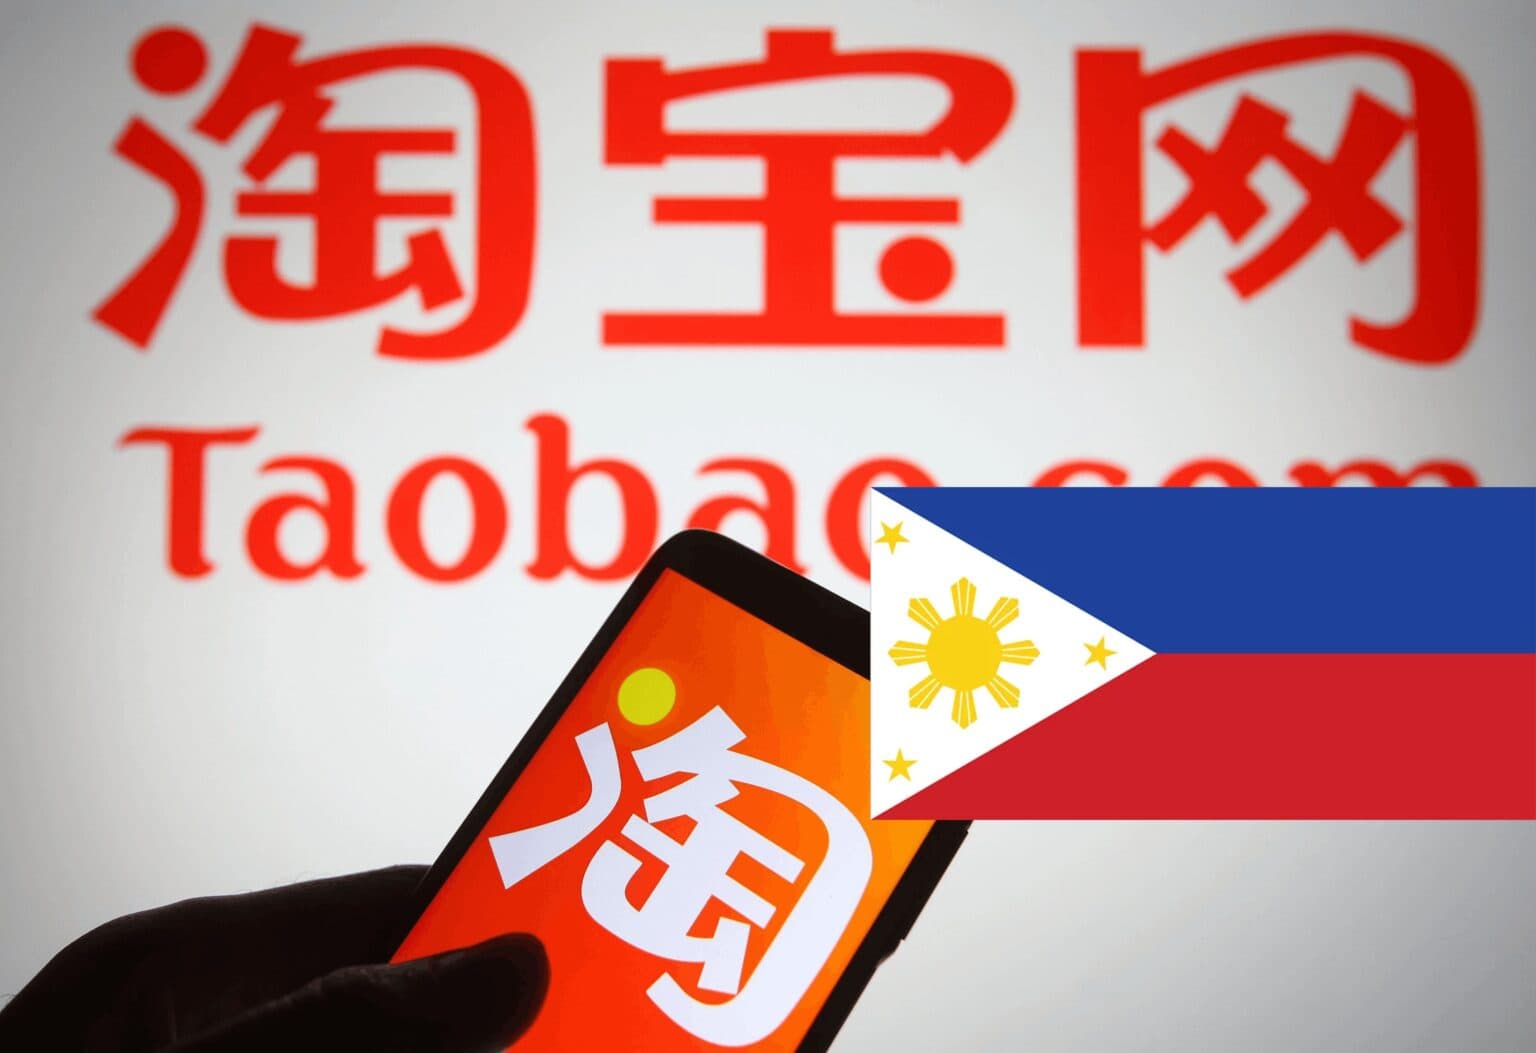 How To Order From Taobao to the Philippines